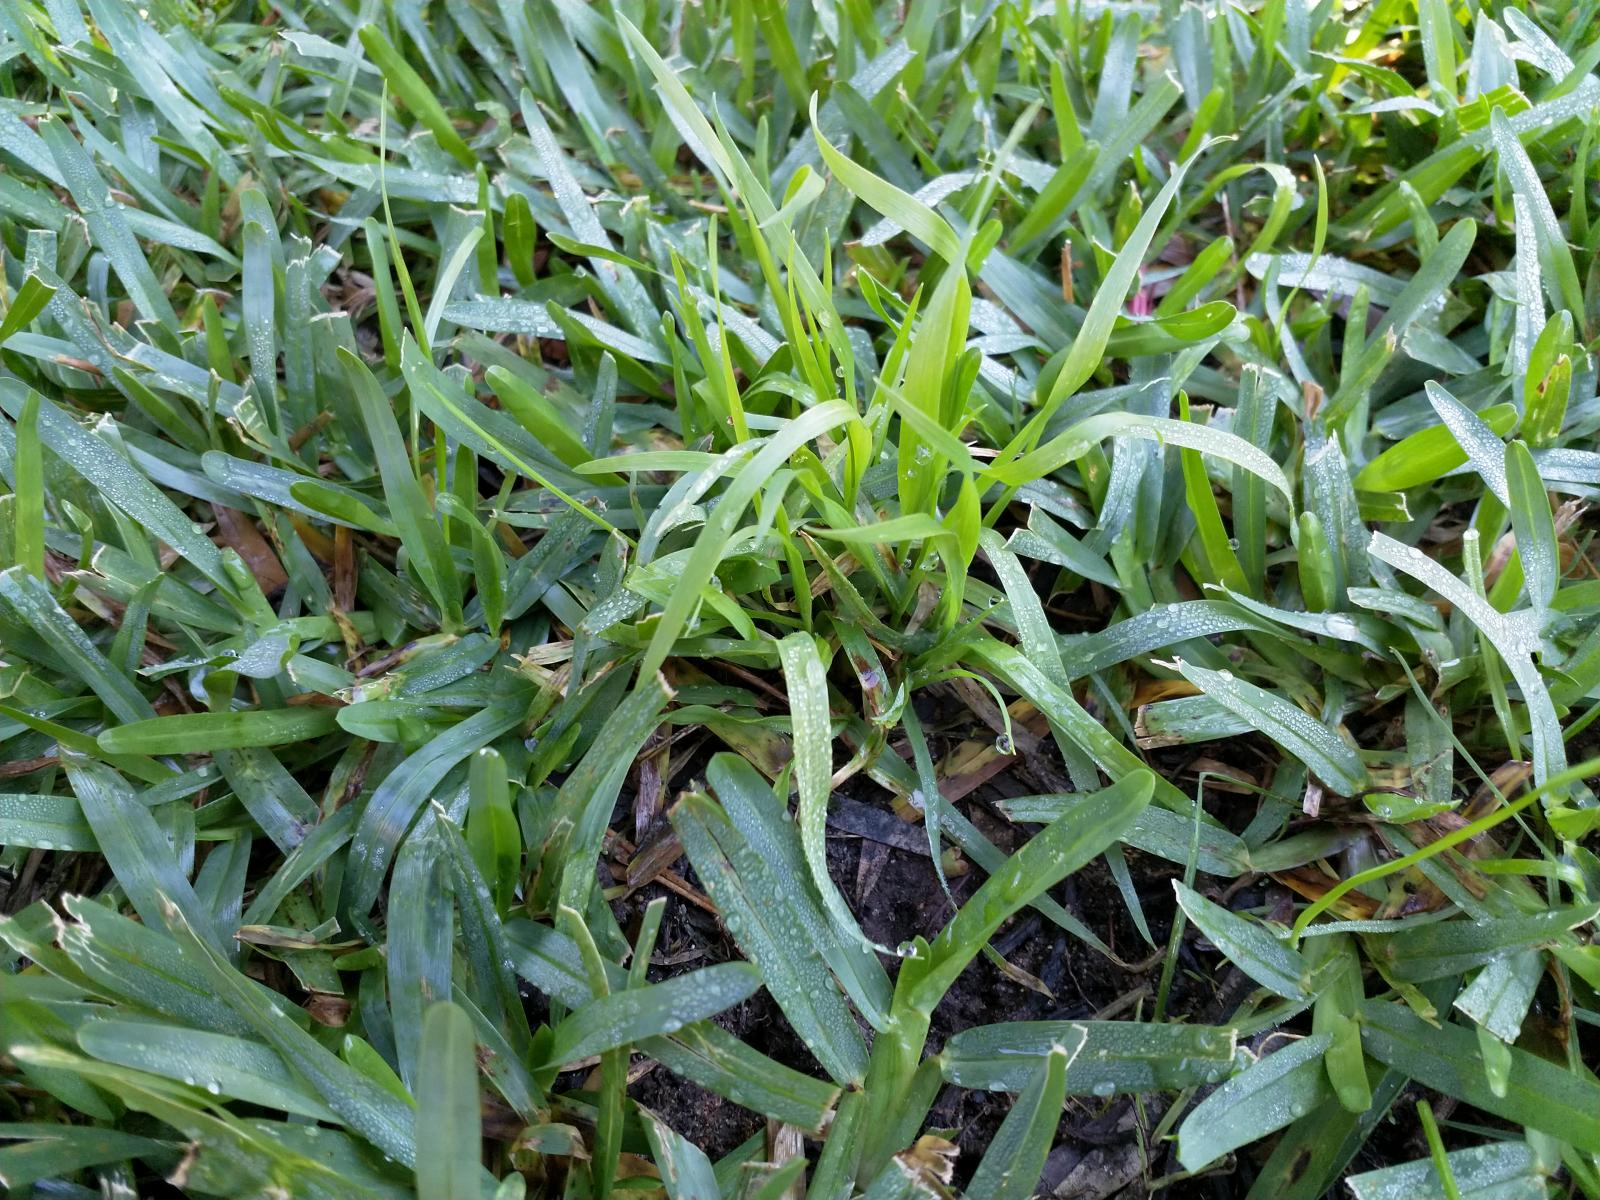 Unknown weed in lawn